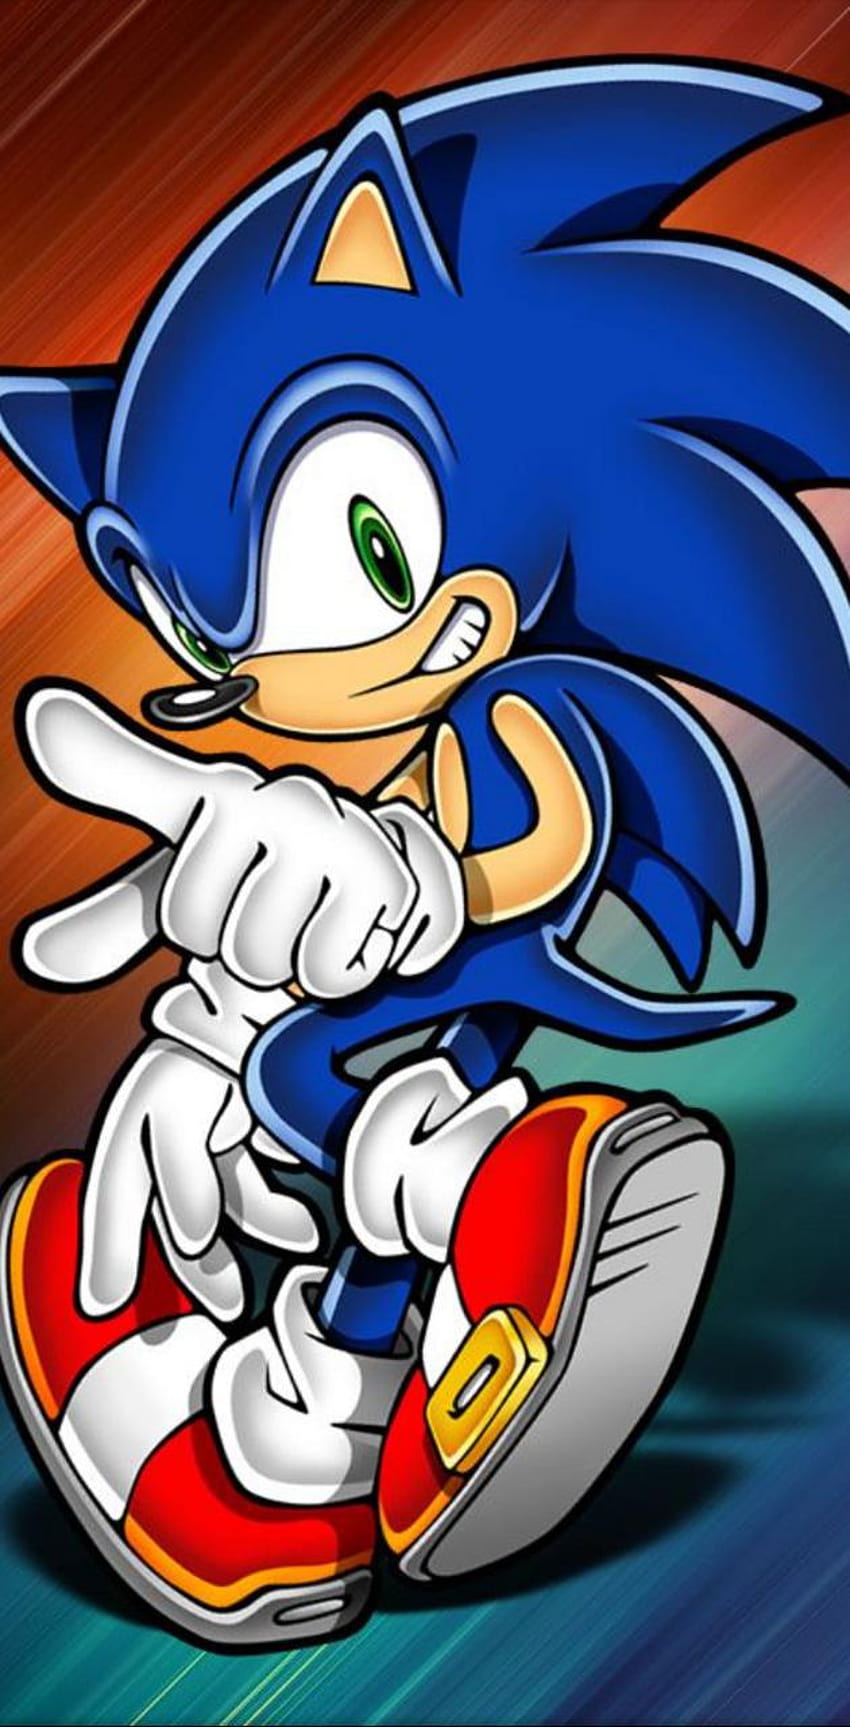 Sonic Art Wallpapers  Sonic Aesthetic Wallpaper iPhone  Android